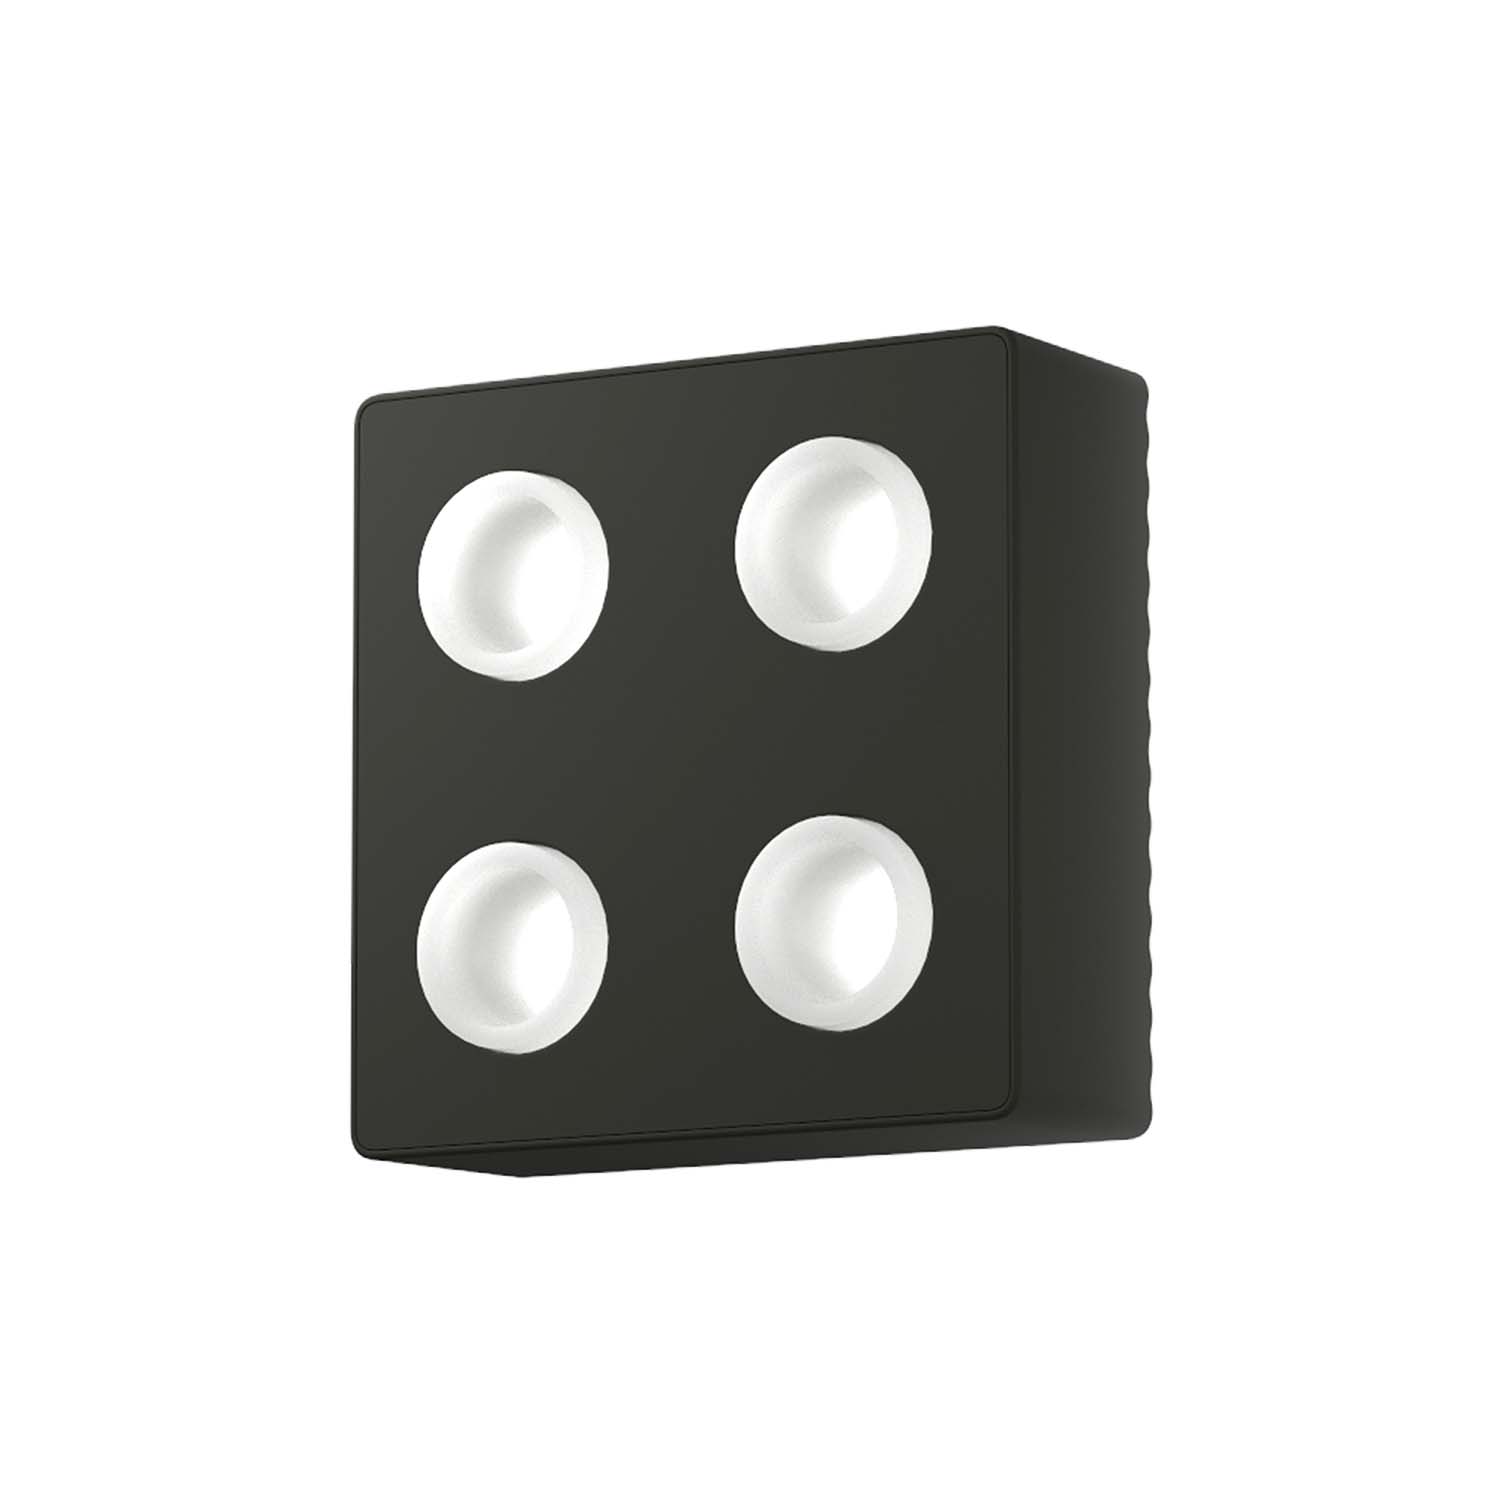 DOMINO - Wall light in the shape of a lego or domino